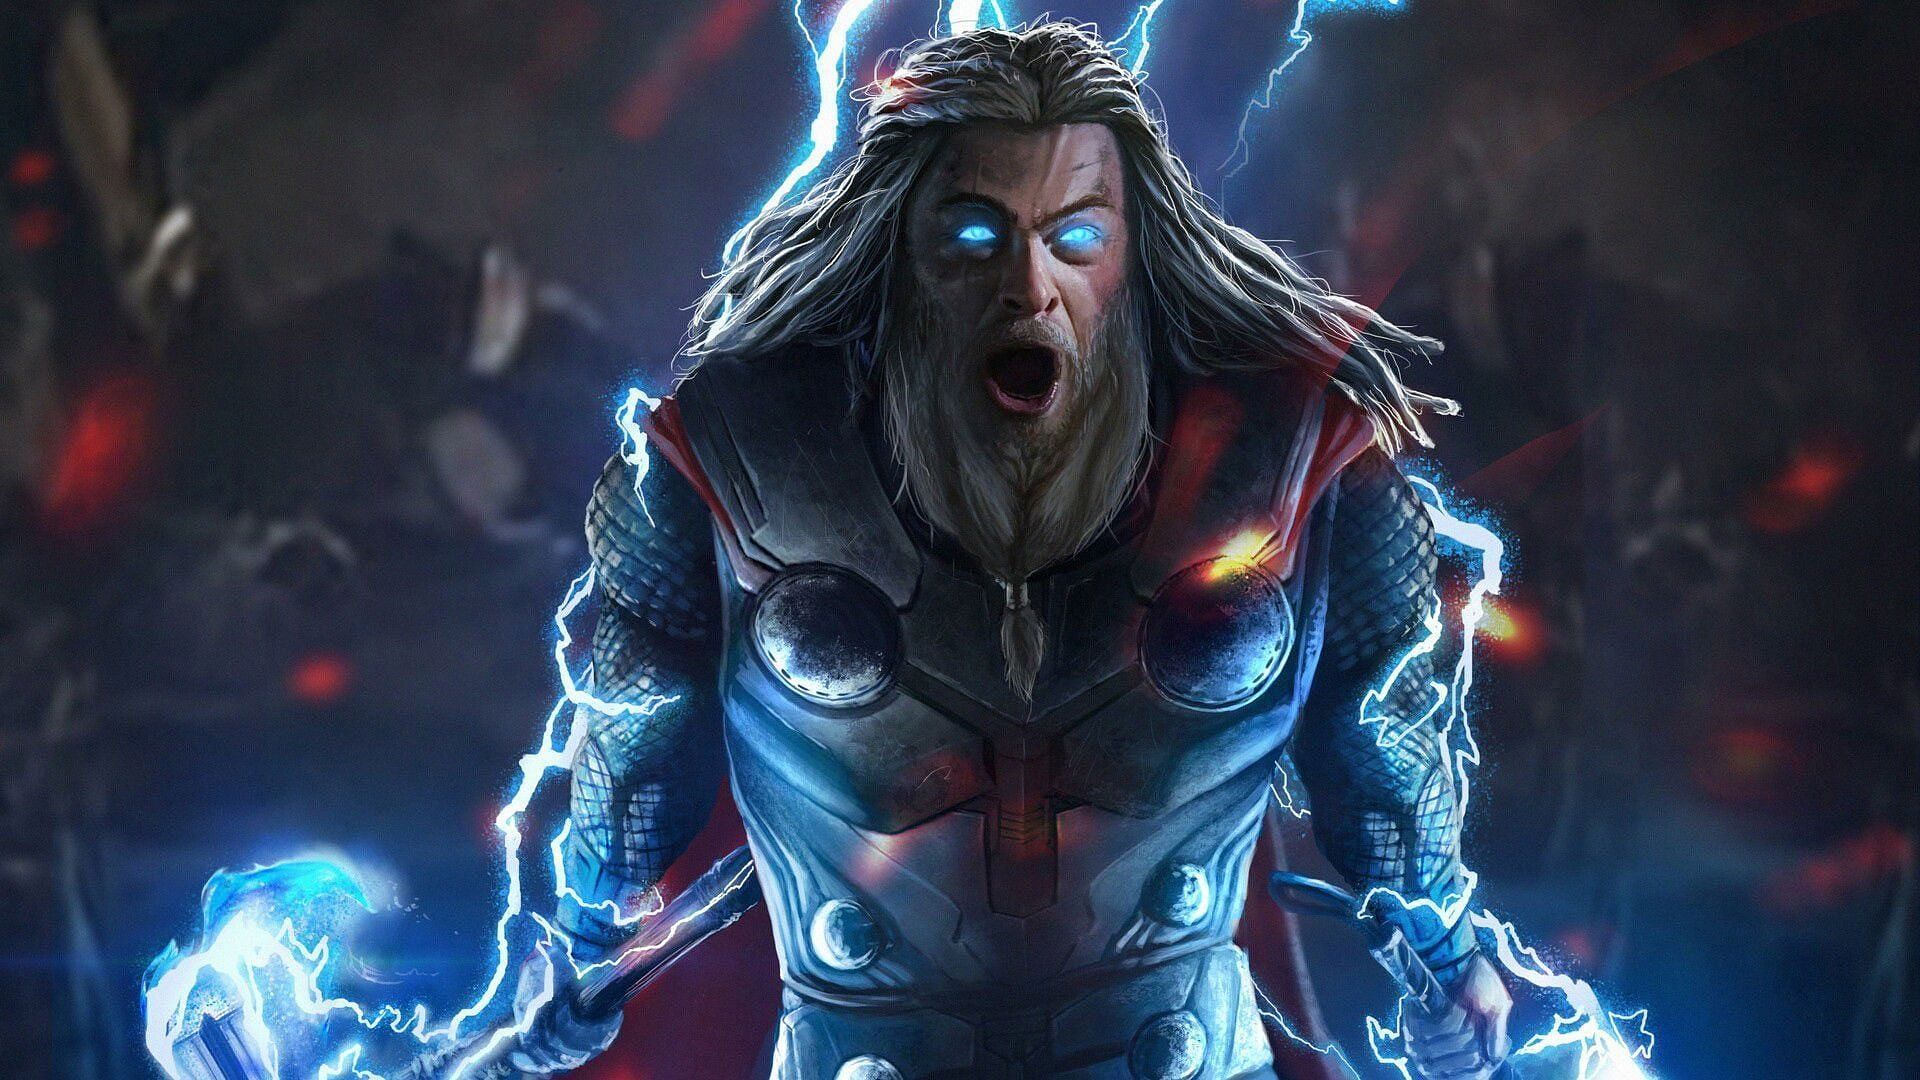 Chris Hemsworth&#039;s Thor could potentially appear in Deadpool 3 or Eternals 2 among other MCU projects (Image via Marvel)